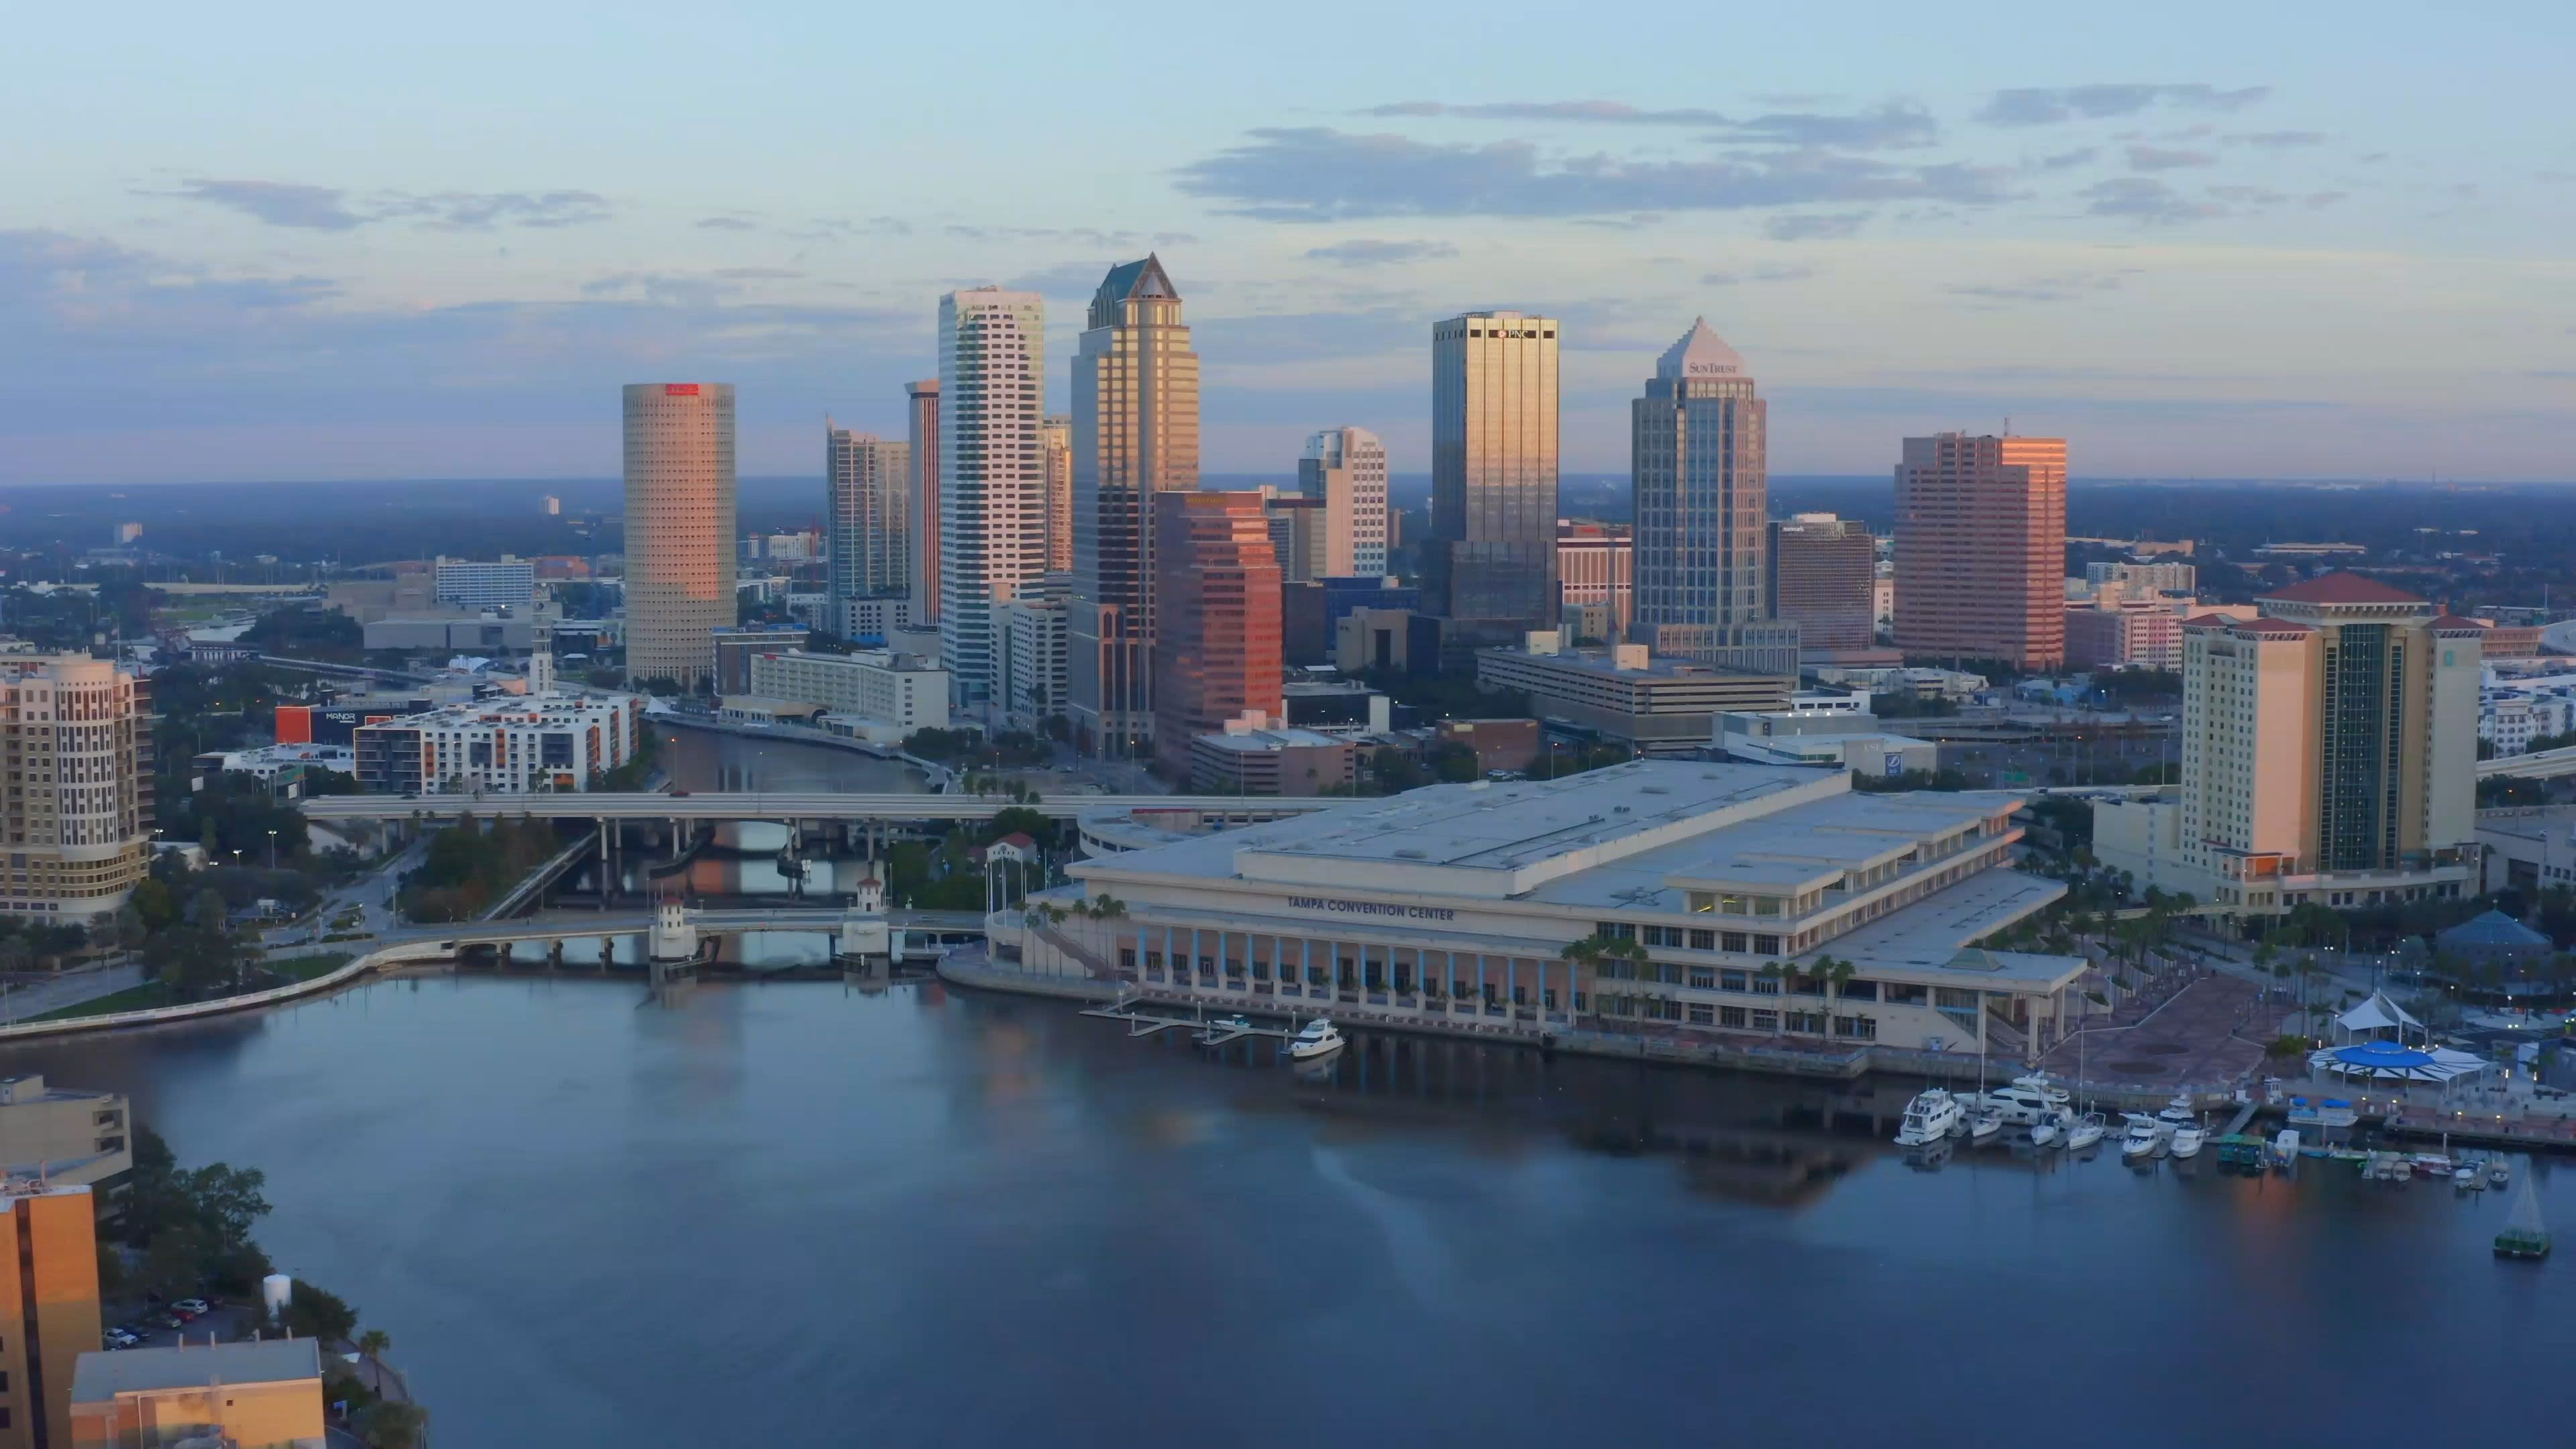 Take a closer look at culture in Tampa Bay, Florida